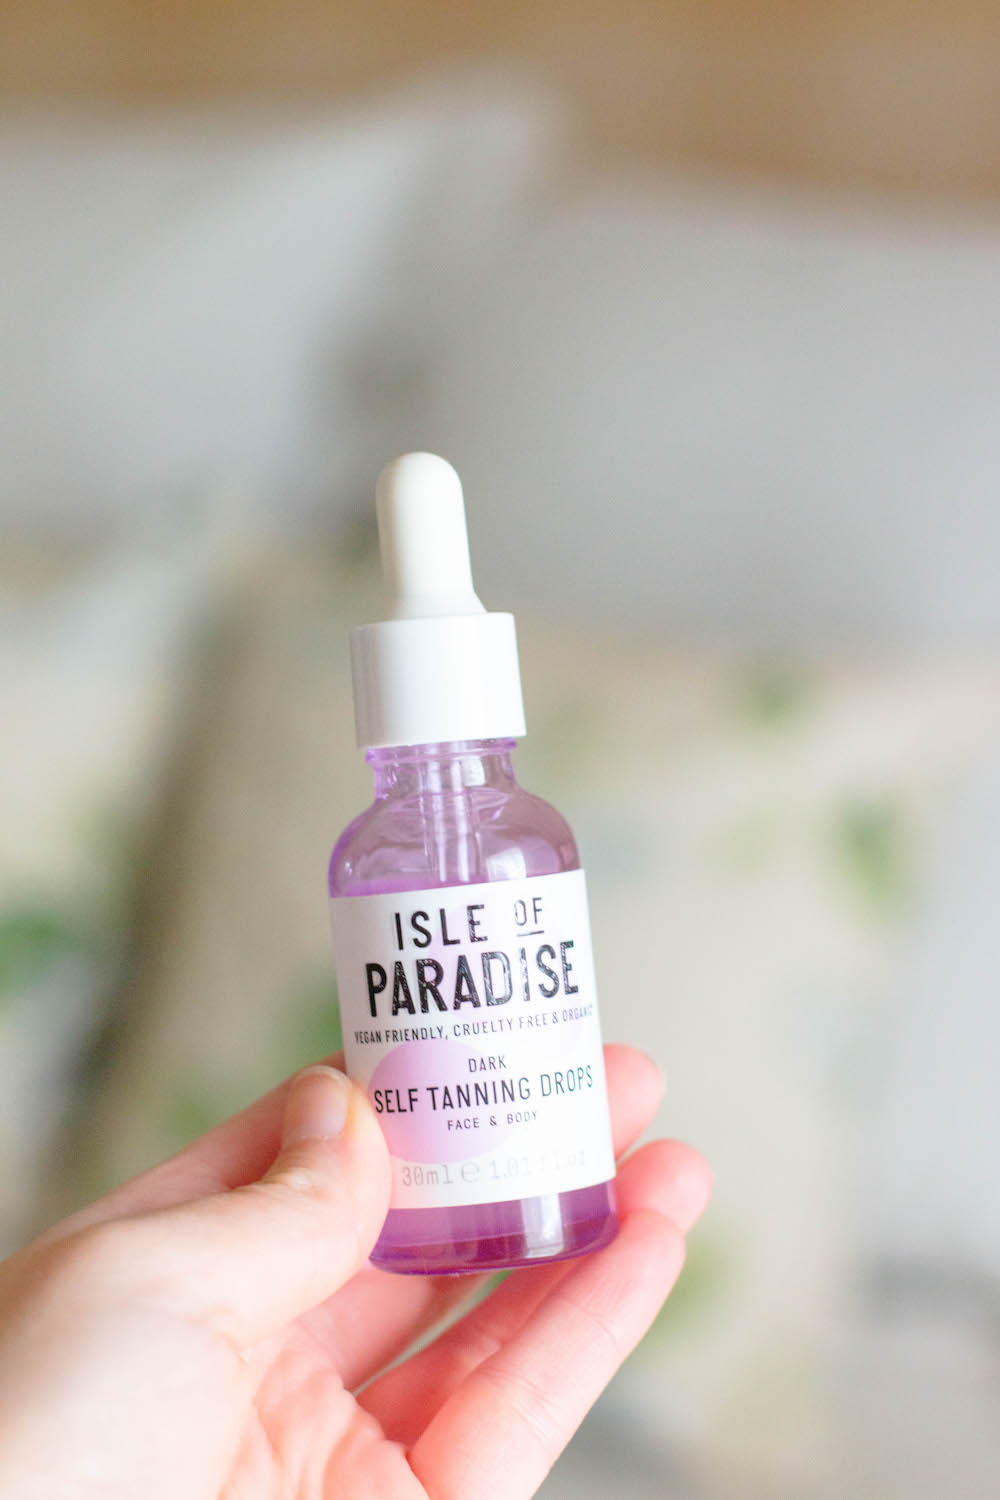 Isle Of Paradise Tanning Drops Review: Self Tanning Drops